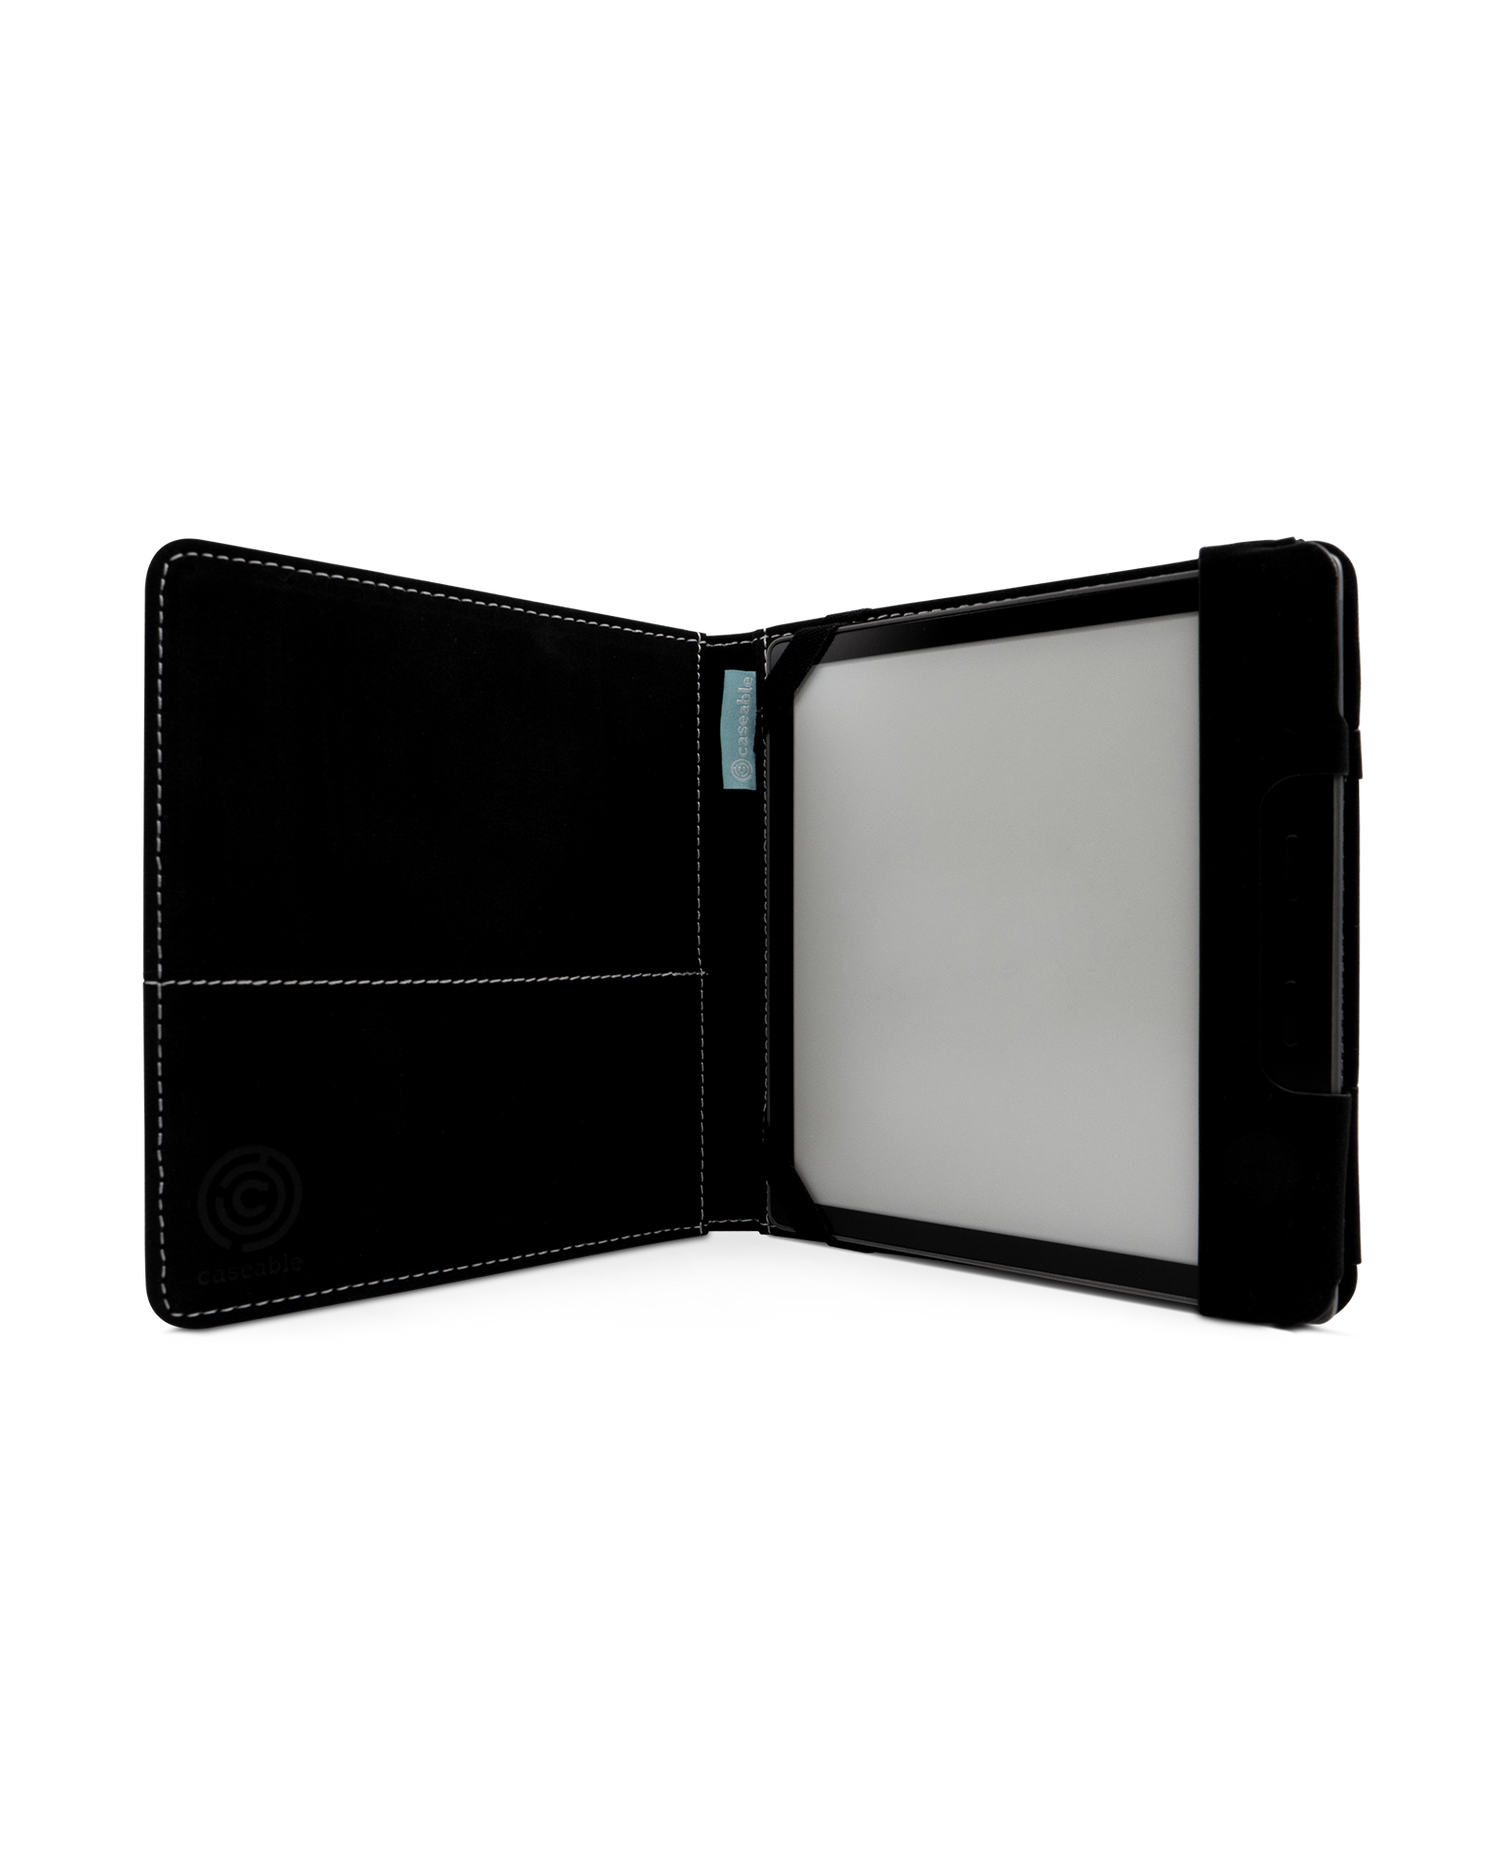 Gold Marble eReader Case for tolino vision 6: Opened interior view